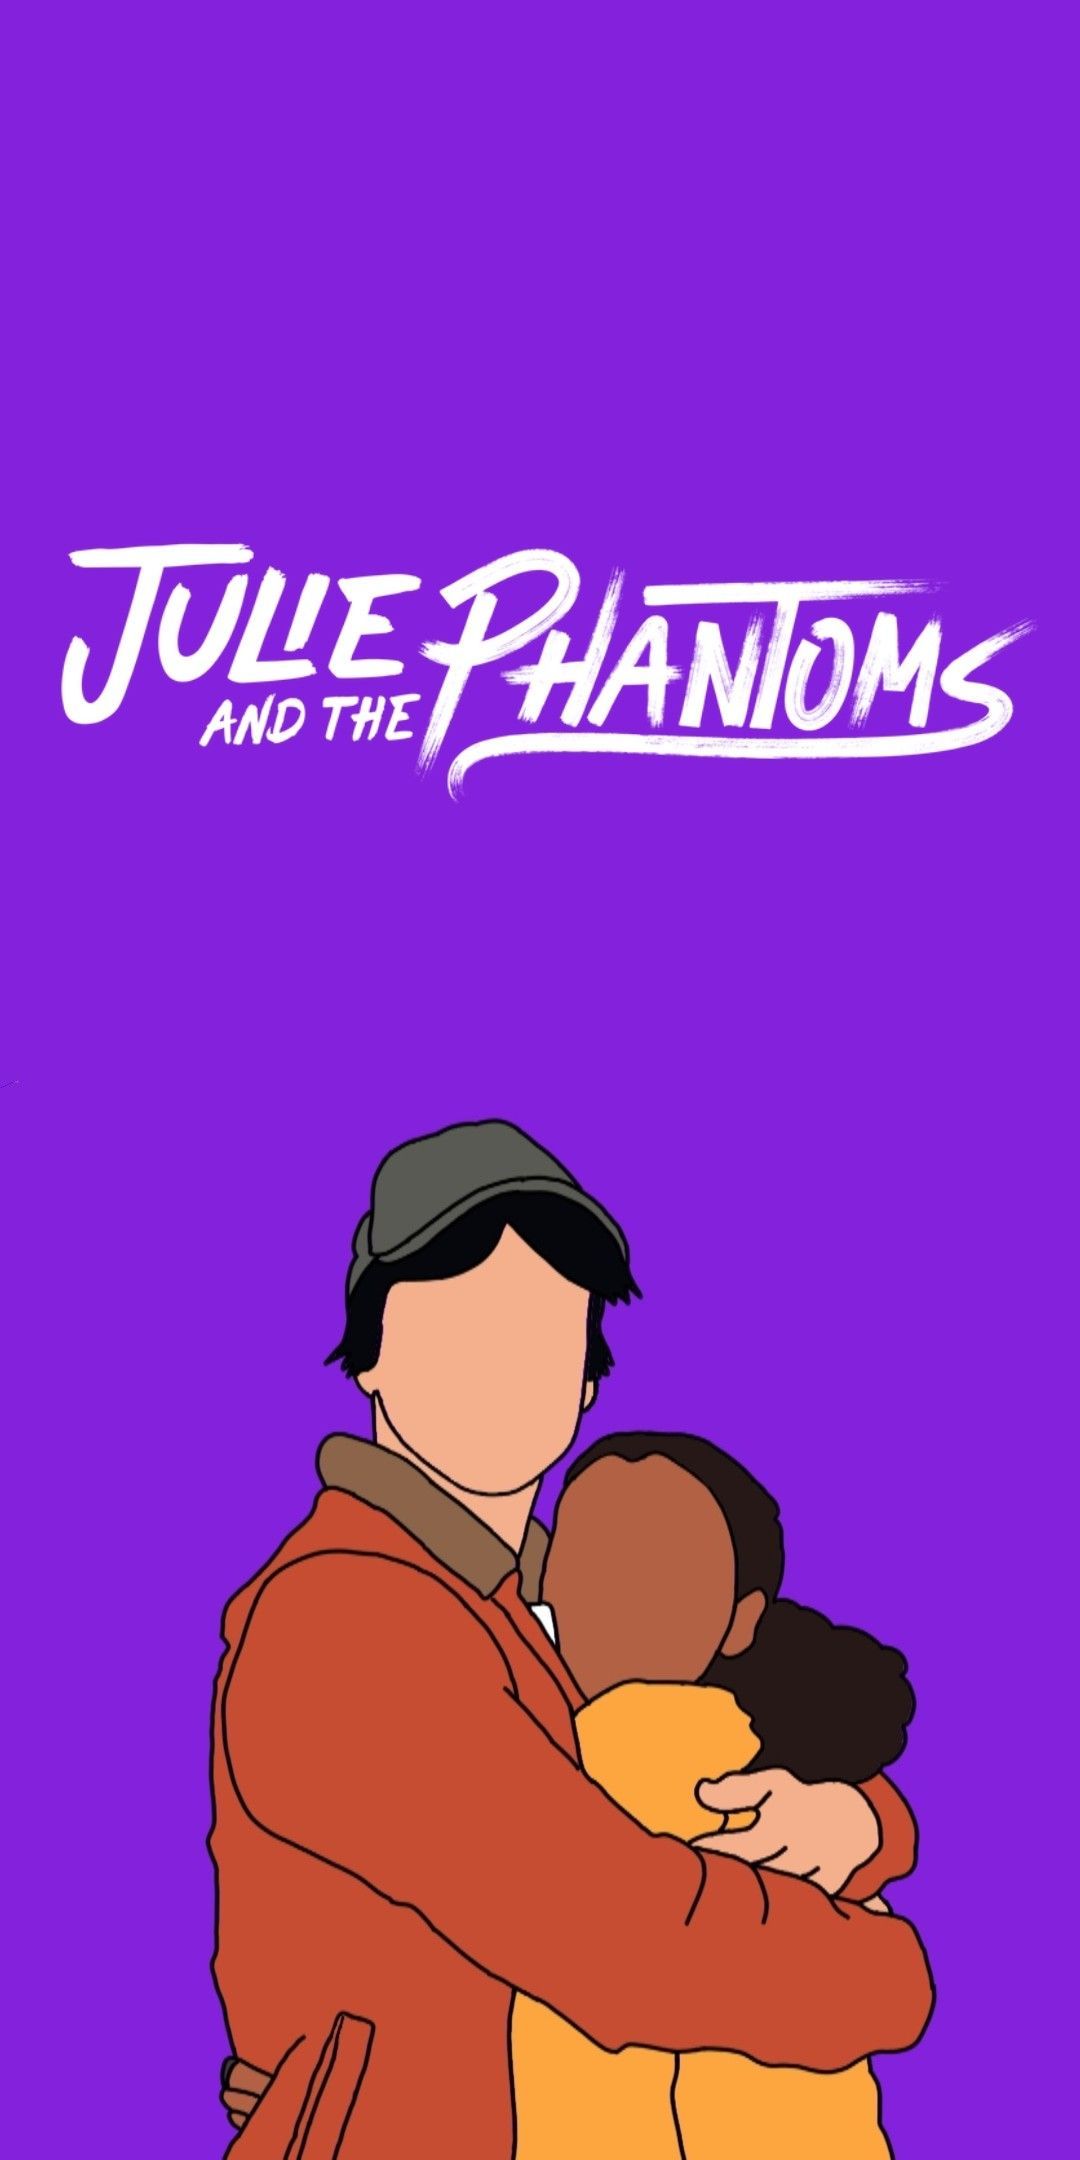 A poster for the movie julie and phantoms - Netflix